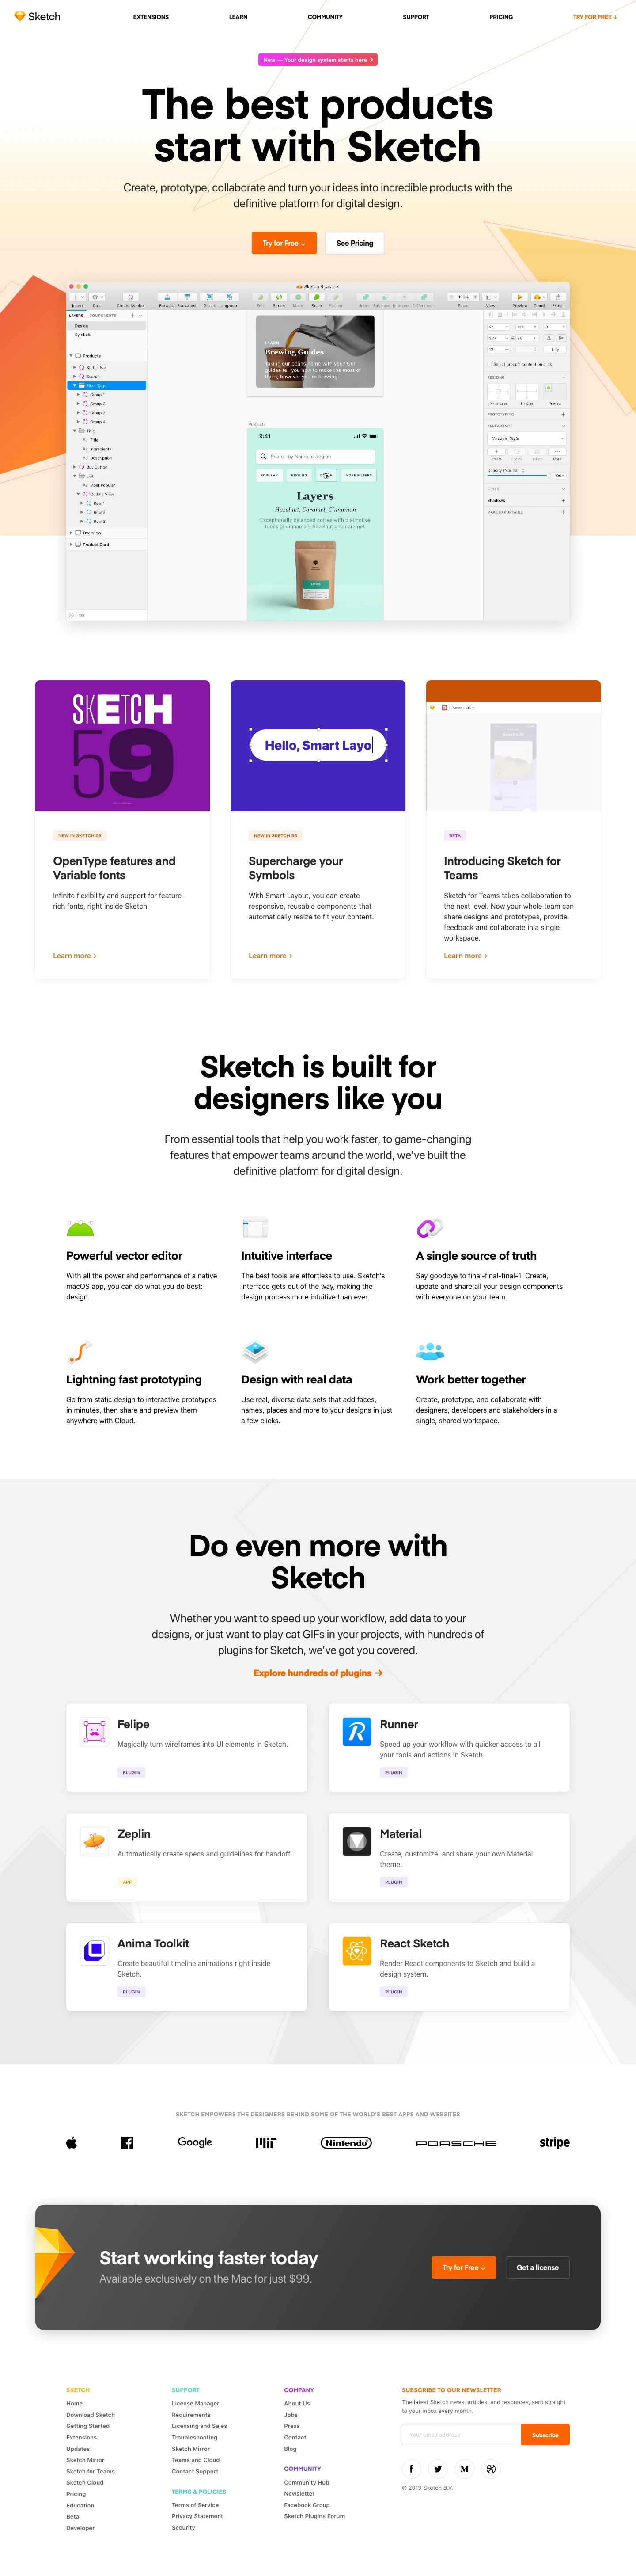 Sketch Landing Page Example: Sketch is a design toolkit built to help you create your best work — from your earliest ideas, through to final artwork. Create, prototype, collaborate and turn your ideas into incredible products with the definitive platform for digital design.